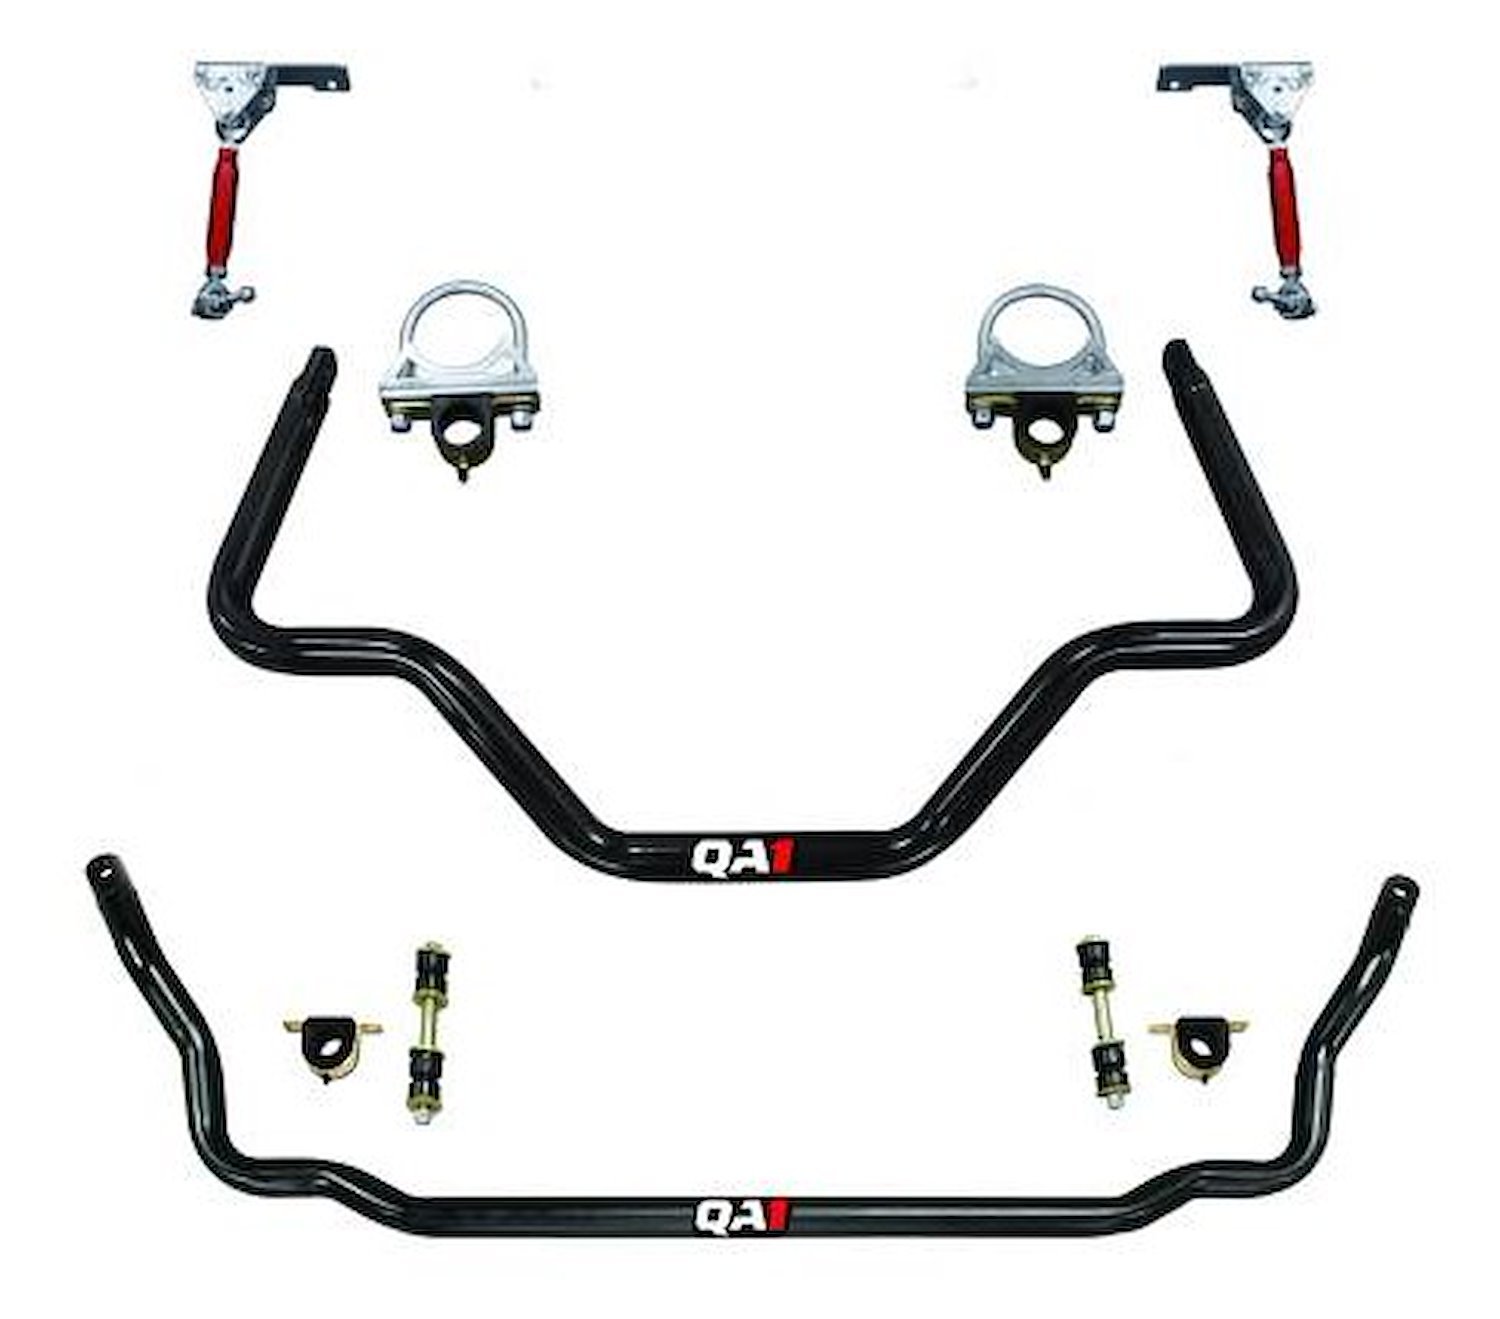 Big Wheel Front and Rear Sway Bar Kit for 1971-1996 Chevy Caprice, Impala